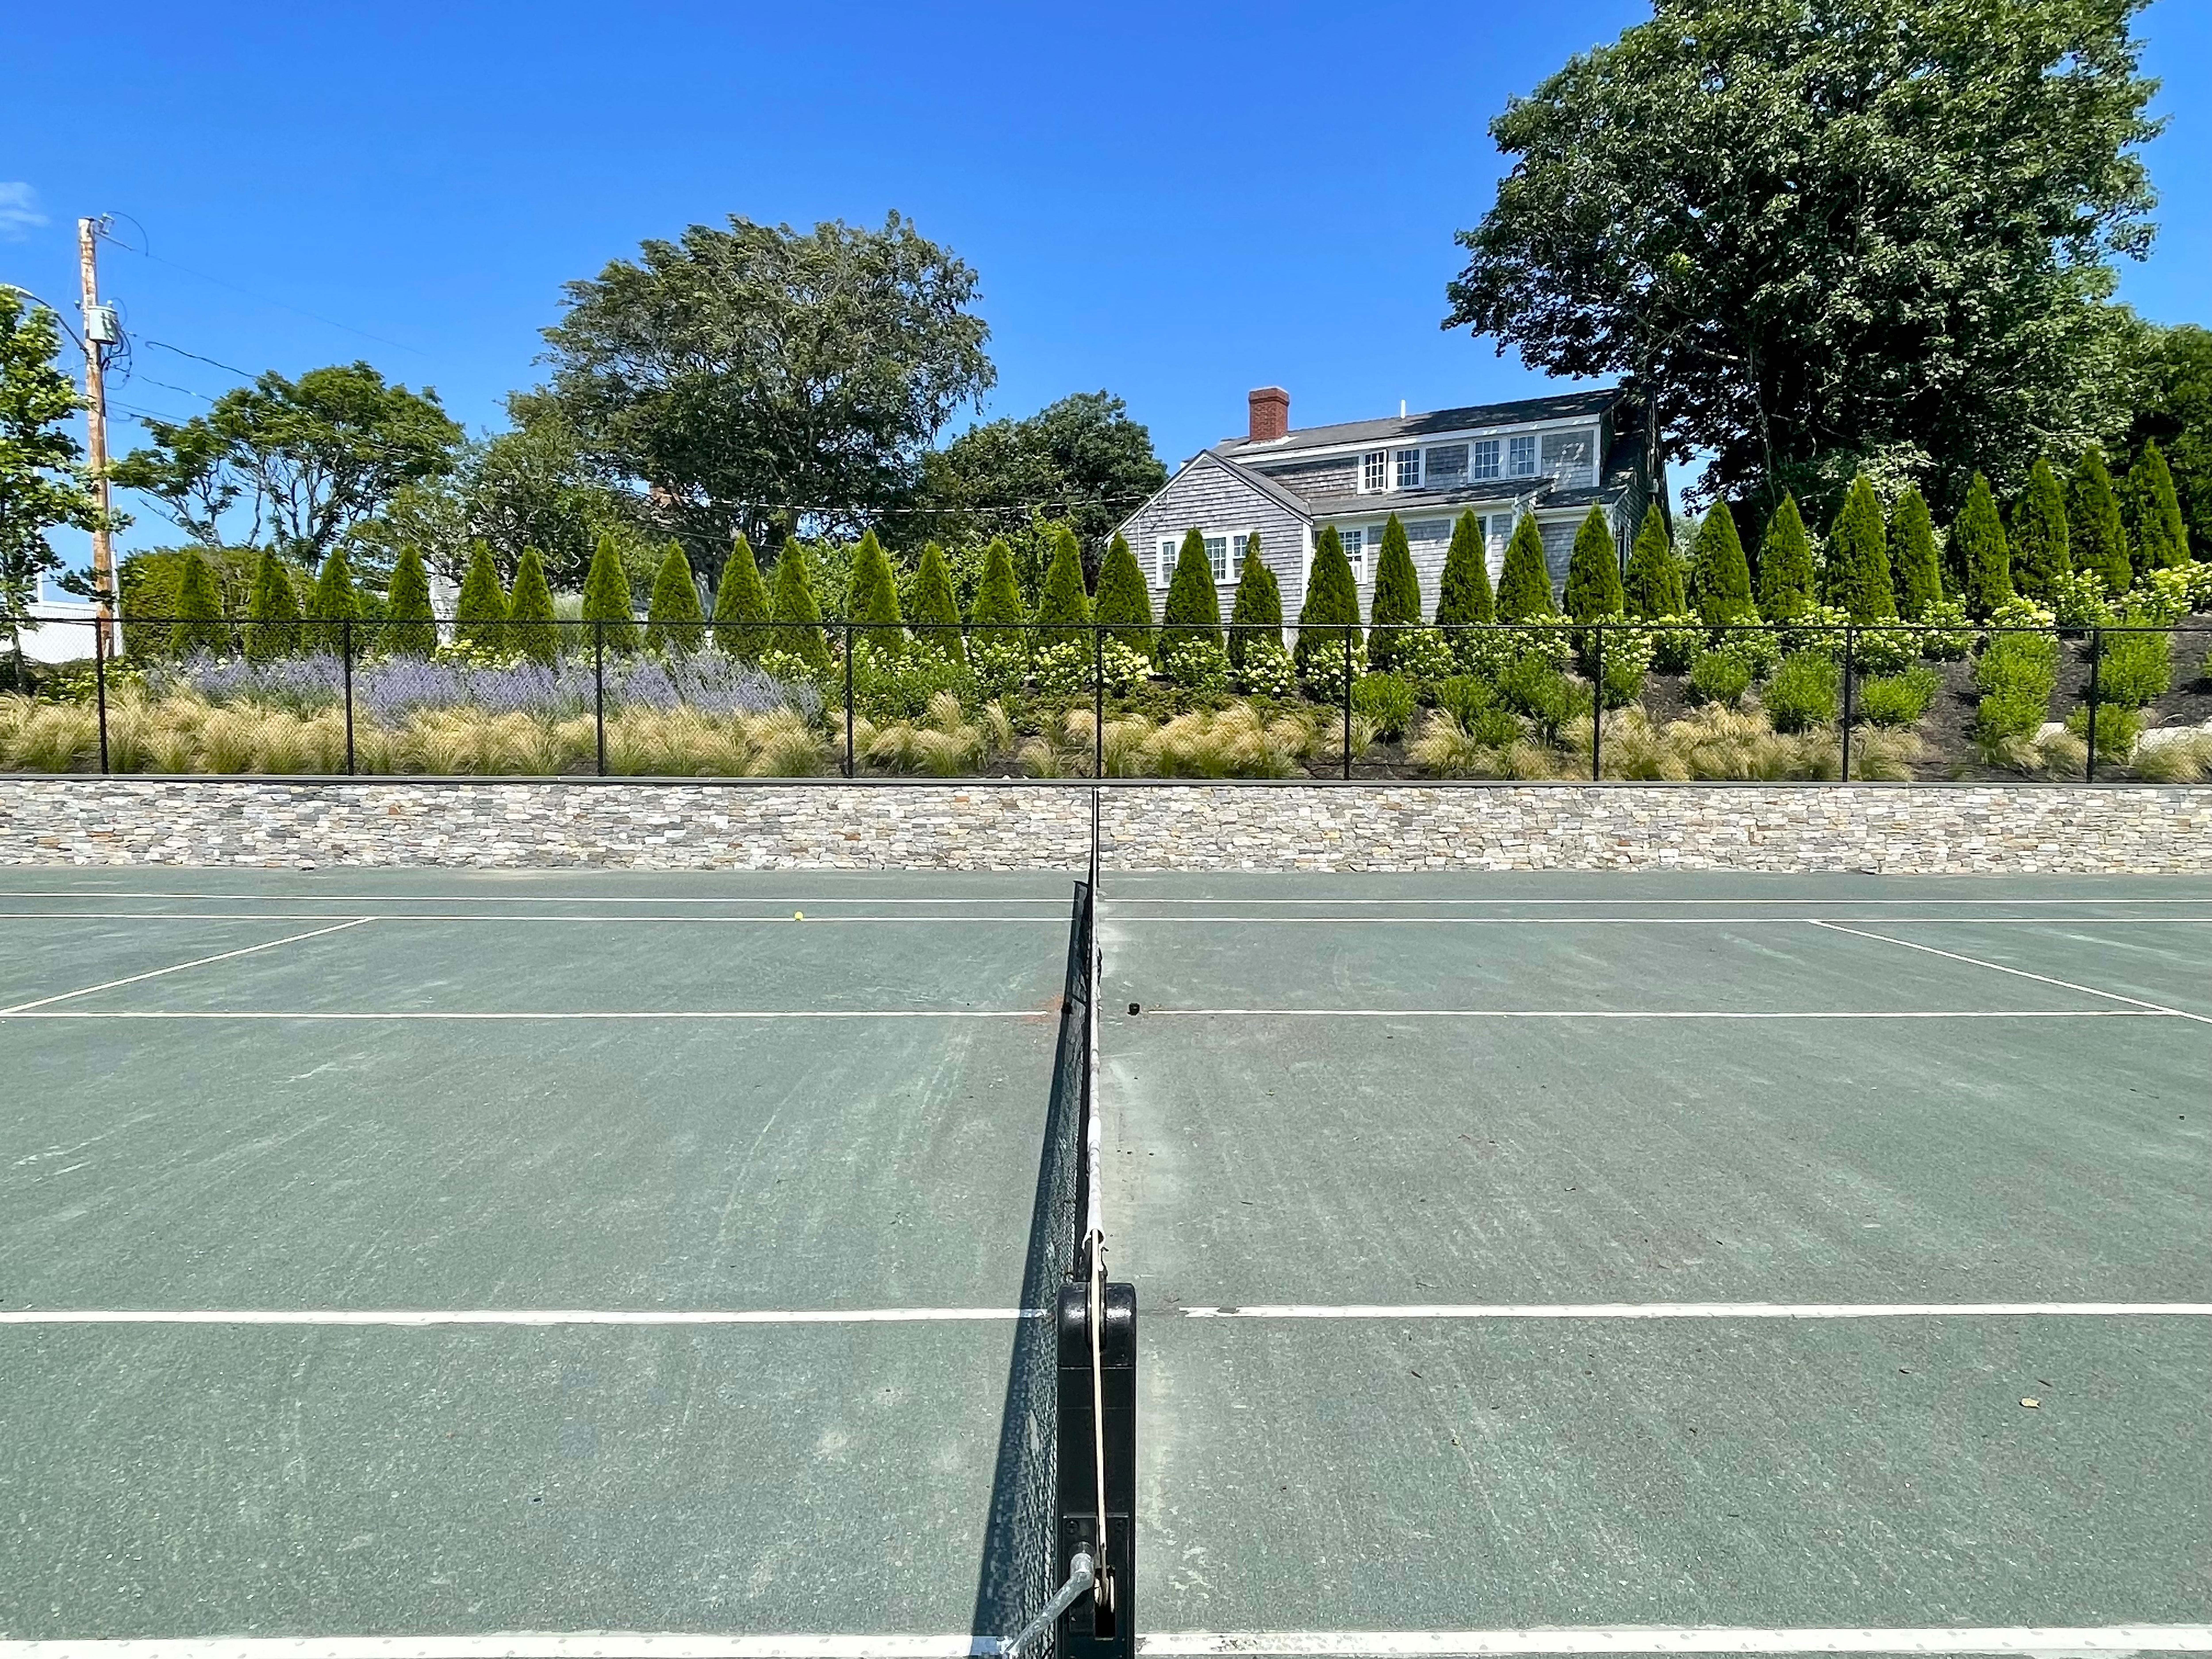 centerline of tennis court with flowers on slope